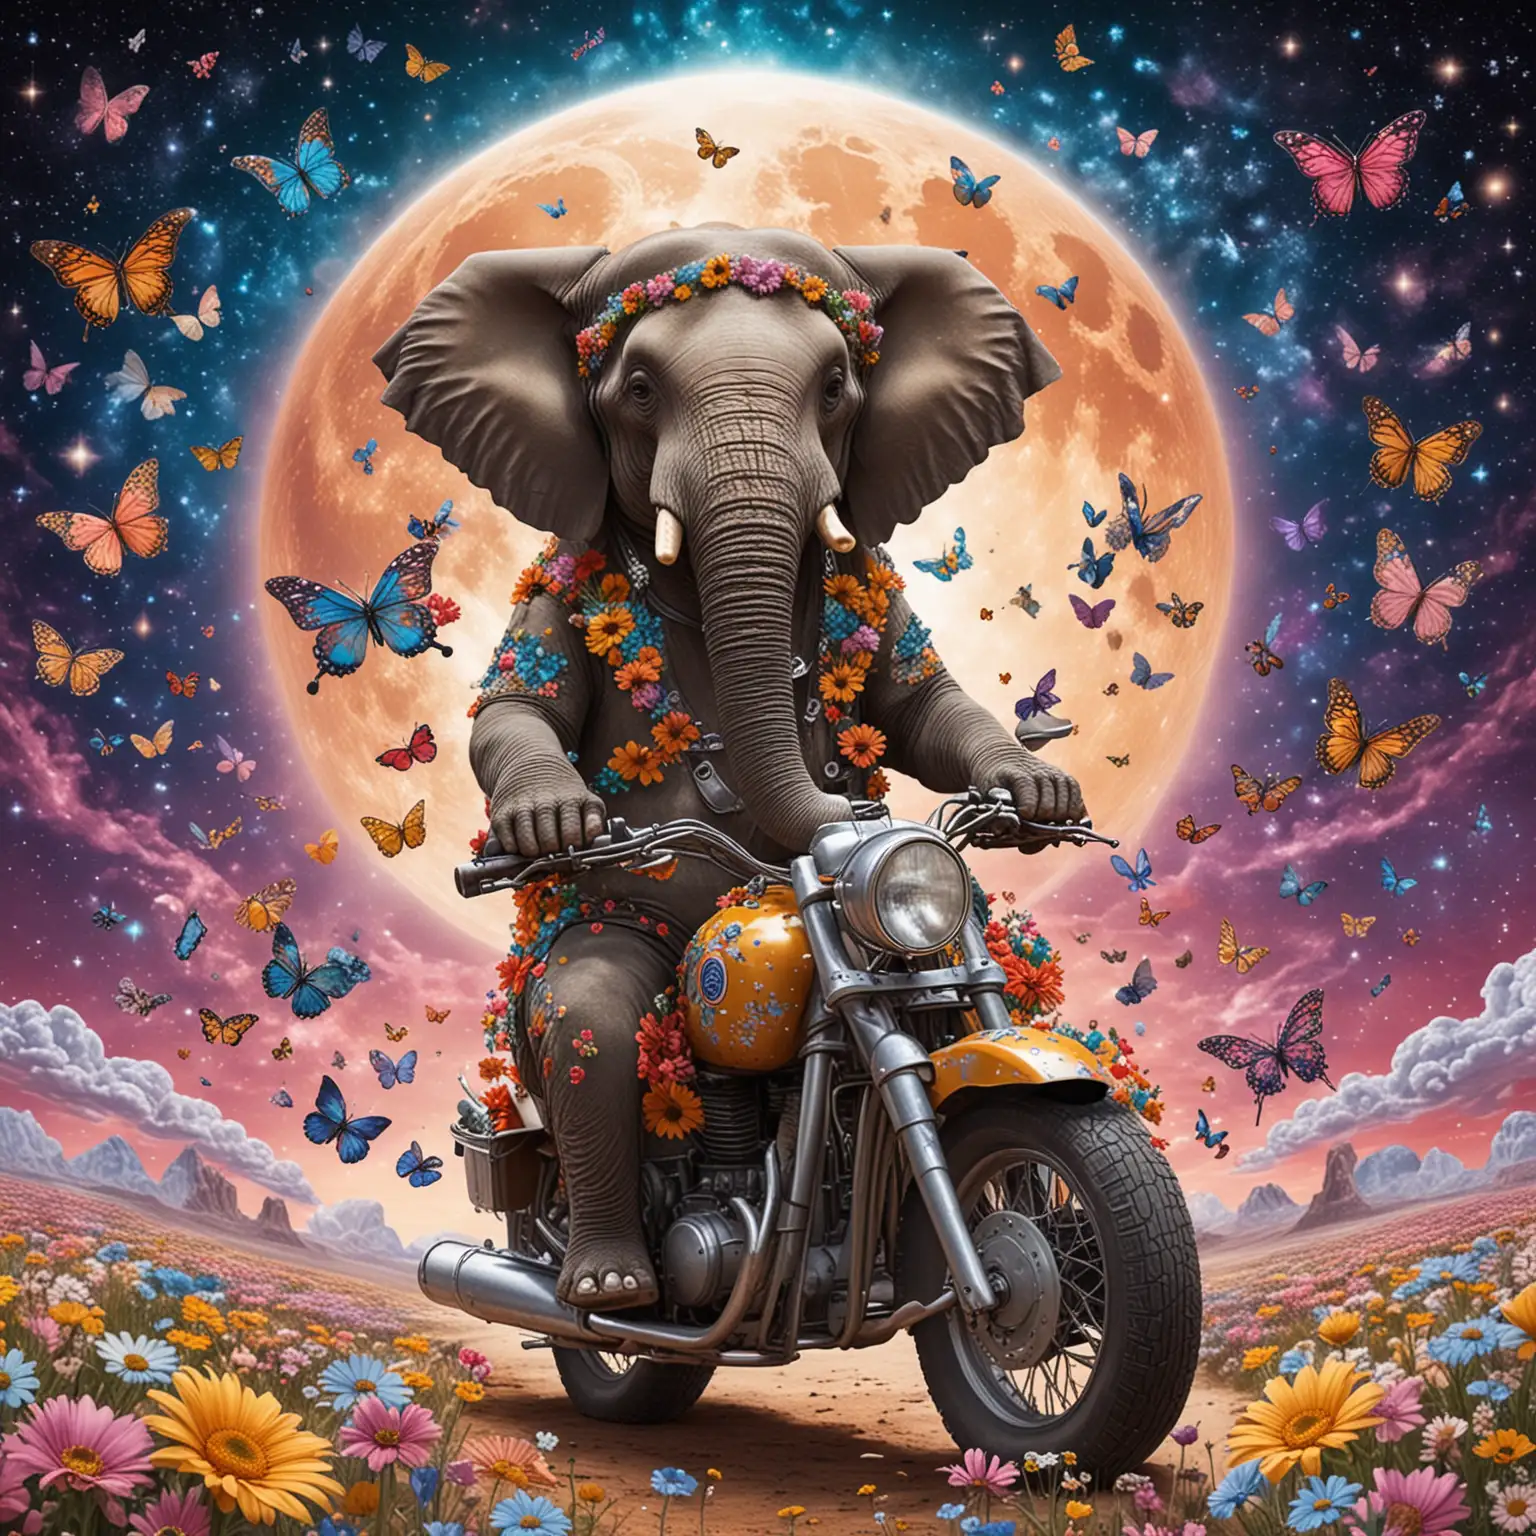 elephant wearing sunglasses riding a motorbike on the moon covered in flowers and butterflies and with the galaxy behind